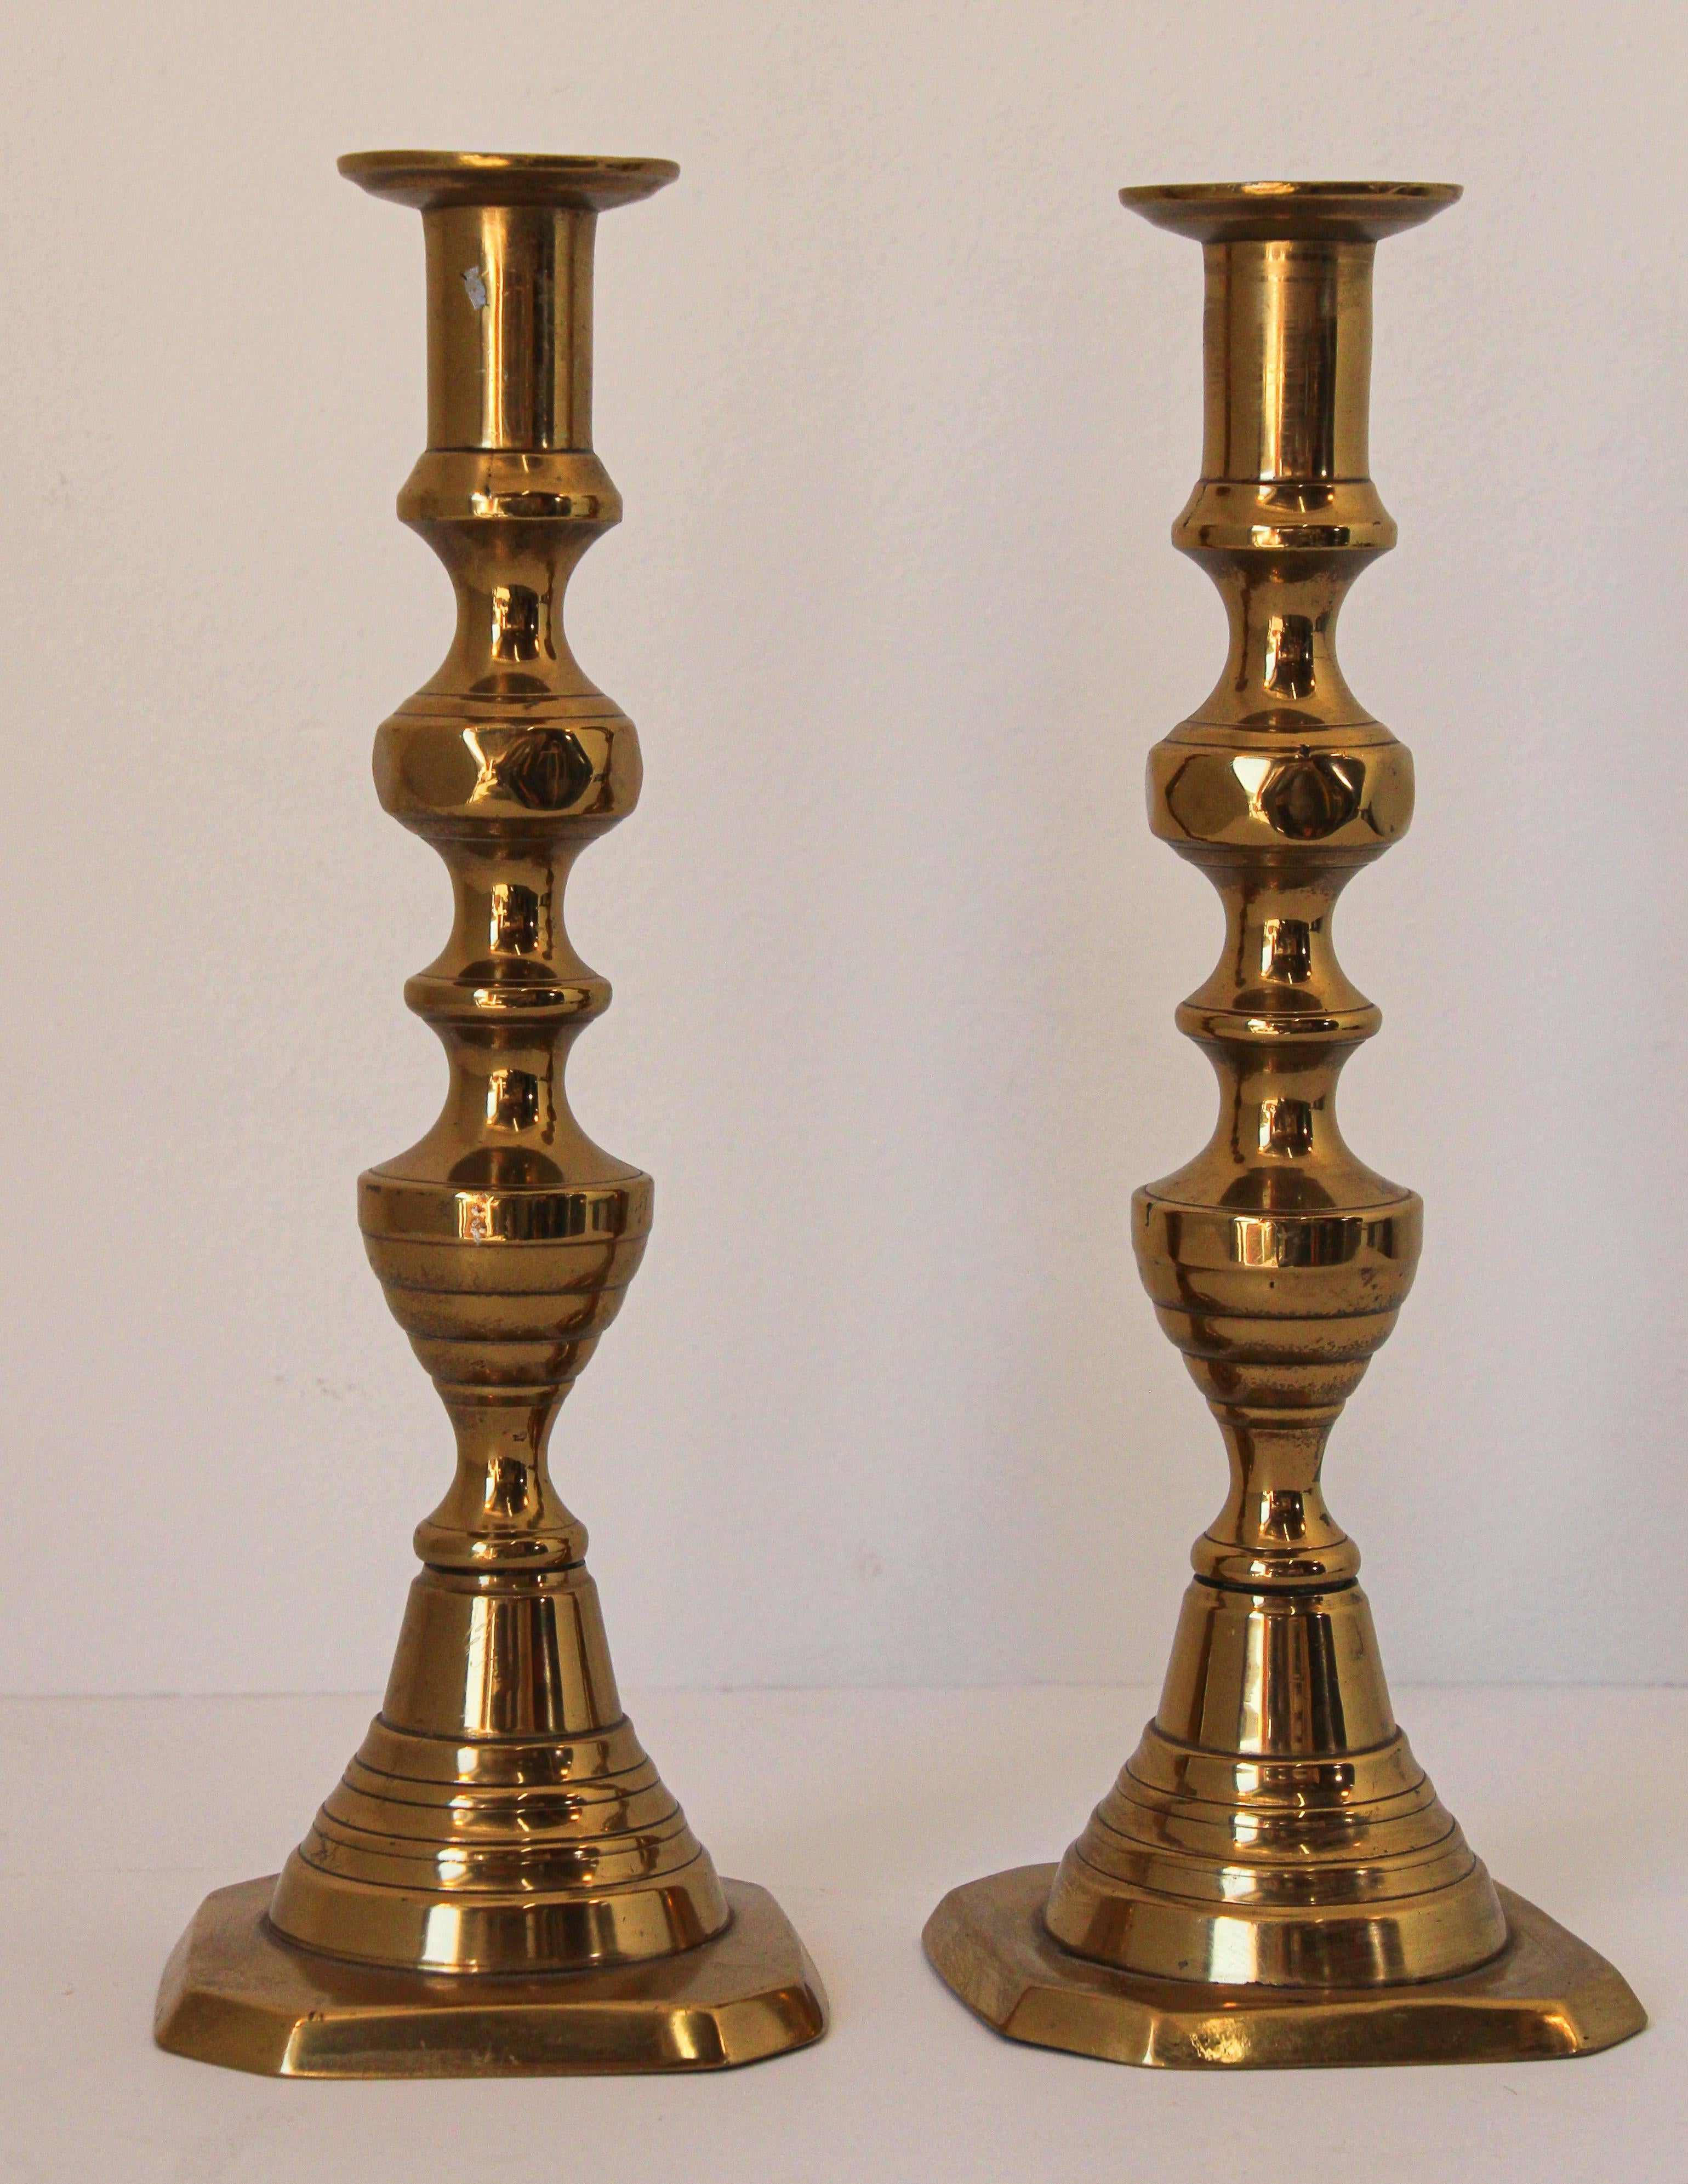 British 19th C. Pair of Victorian English Brass Beehive Candlesticks For Sale